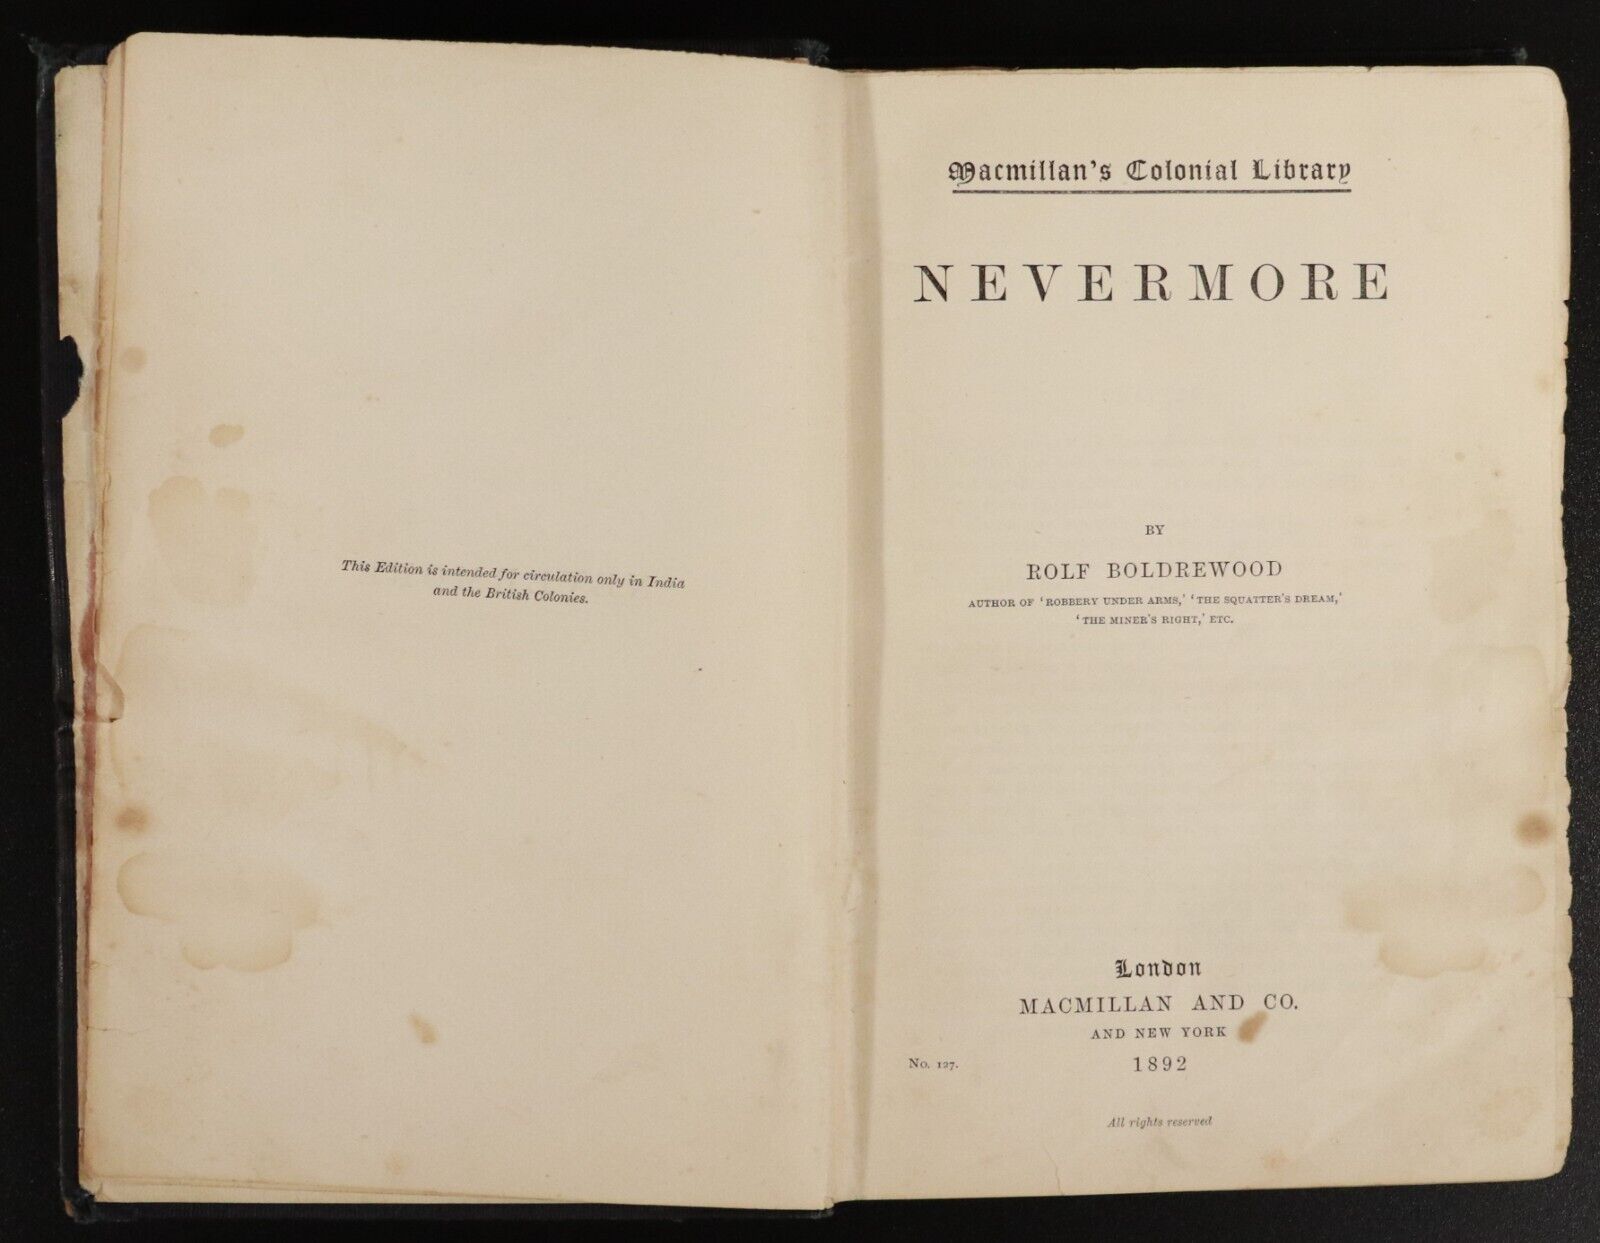 1892 Nevermore by Rolf Boldrewood 1st Edition Antique Australian Fiction Book - 0